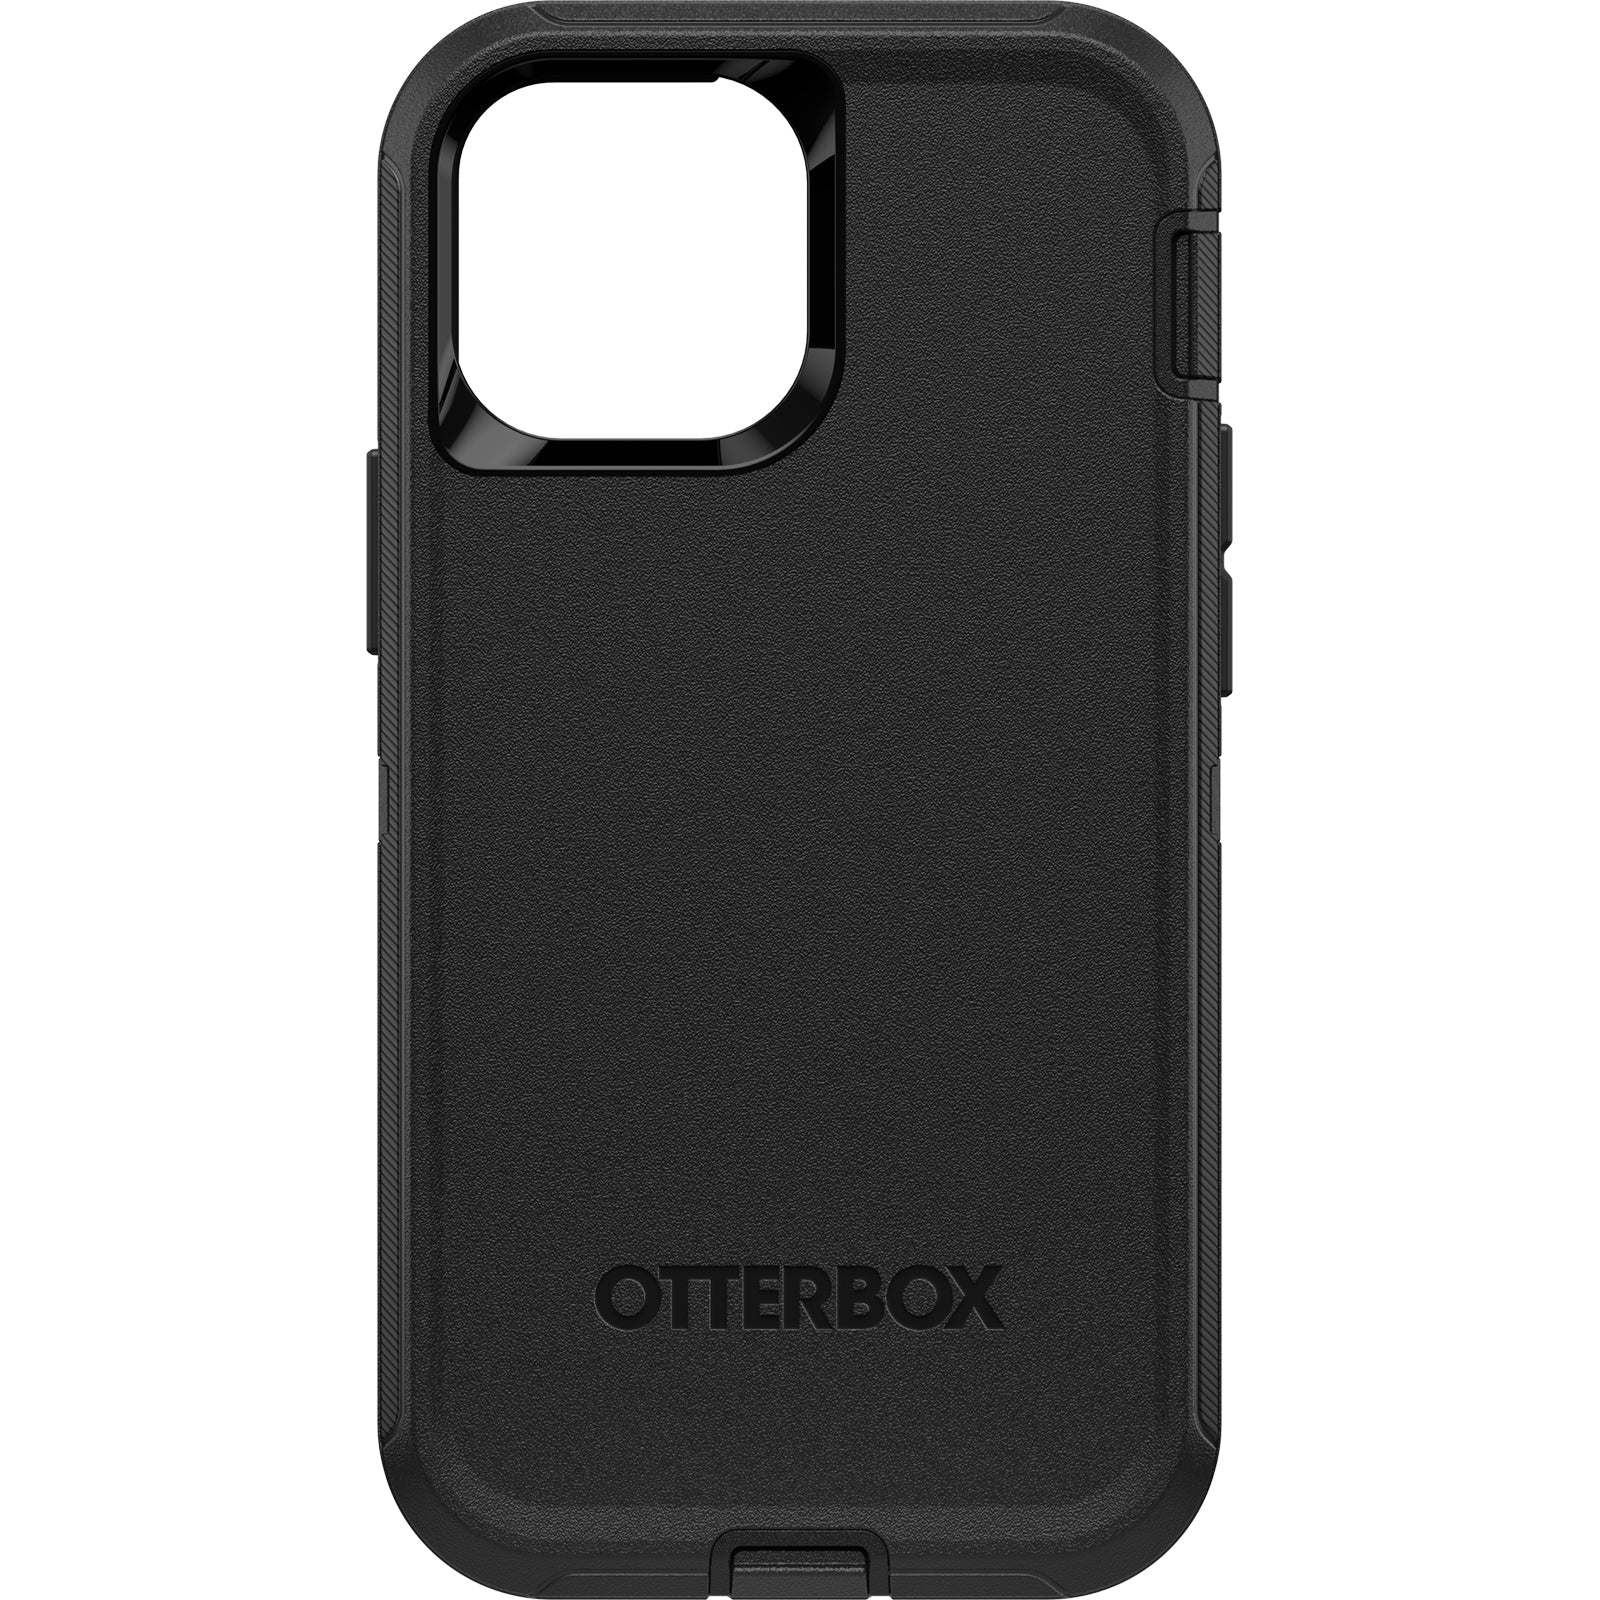 OtterBox Defender Case for iPhone 13 mini / iPhone 12 mini, Shockproof, Drop Proof, Ultra-Rugged, Protective Case, 4x Tested to Military Standard, Black, No retail packaging